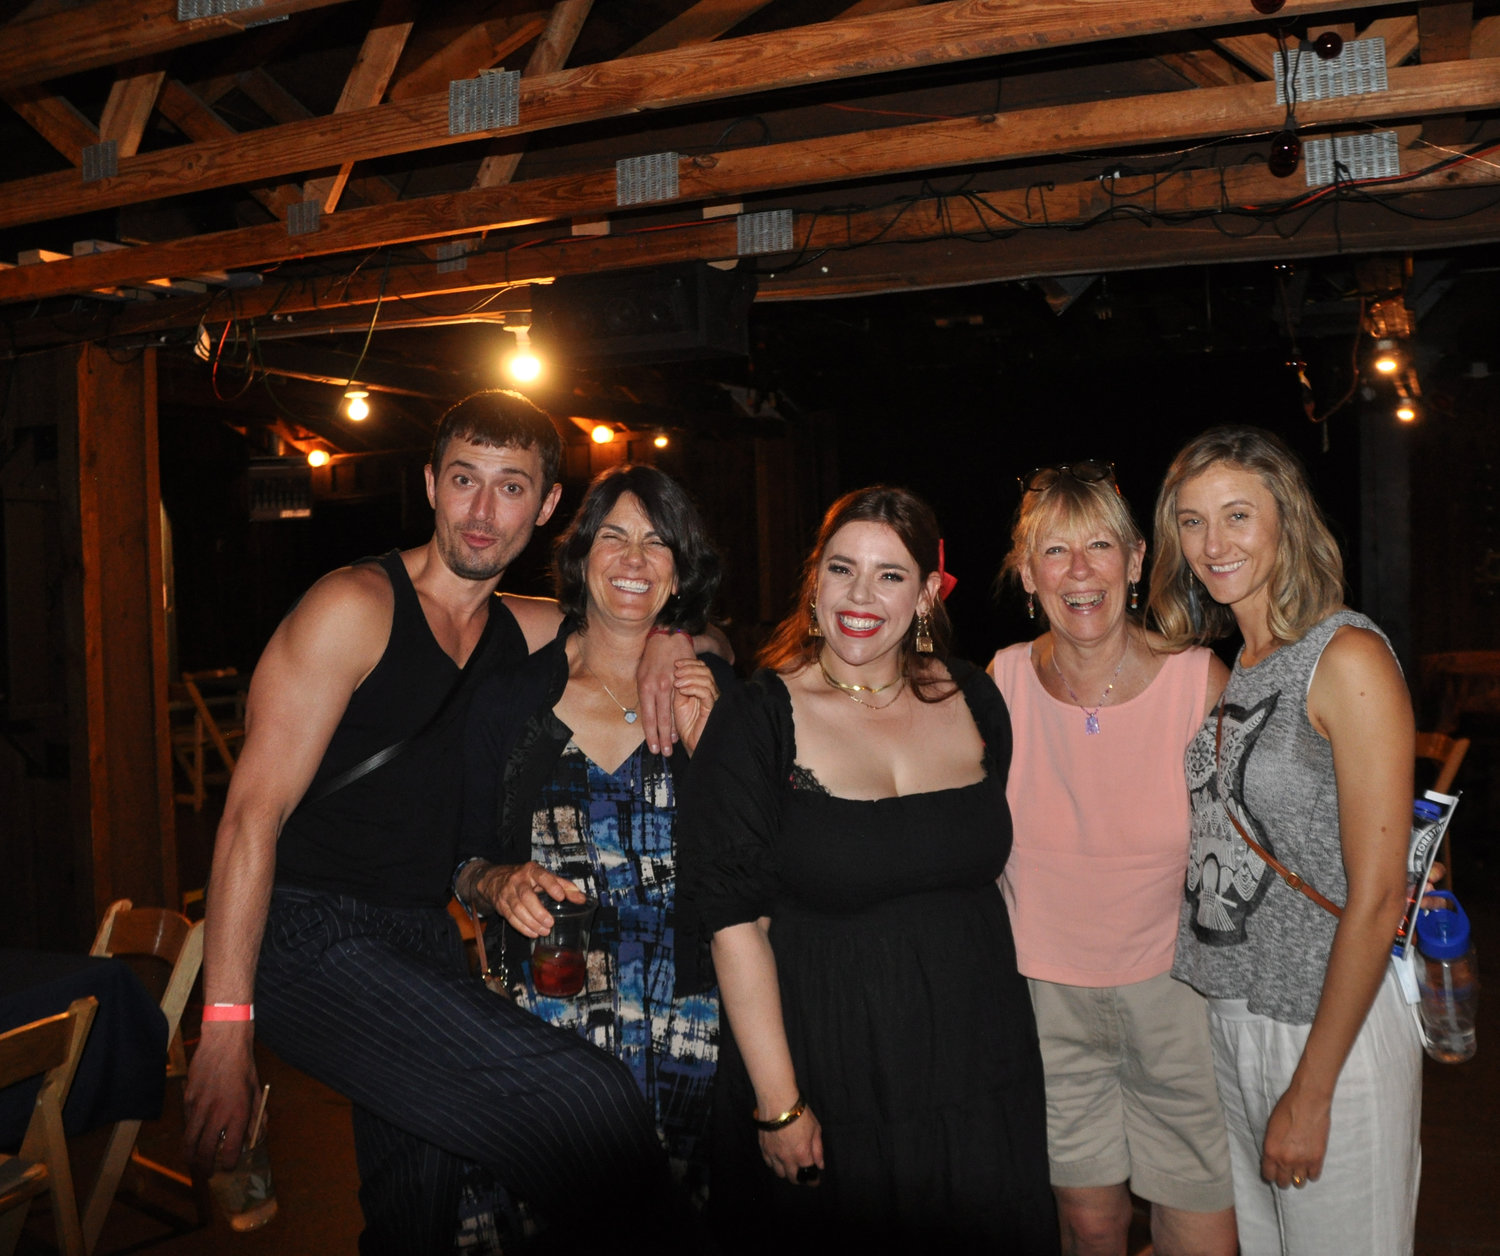 Narrowsburg royalty Jill Padua, second from right, encouraged a group of friends to pose with powerhouse performer Alysha Umphress, center, backstage at the Forestburgh Playhouse last weekend.